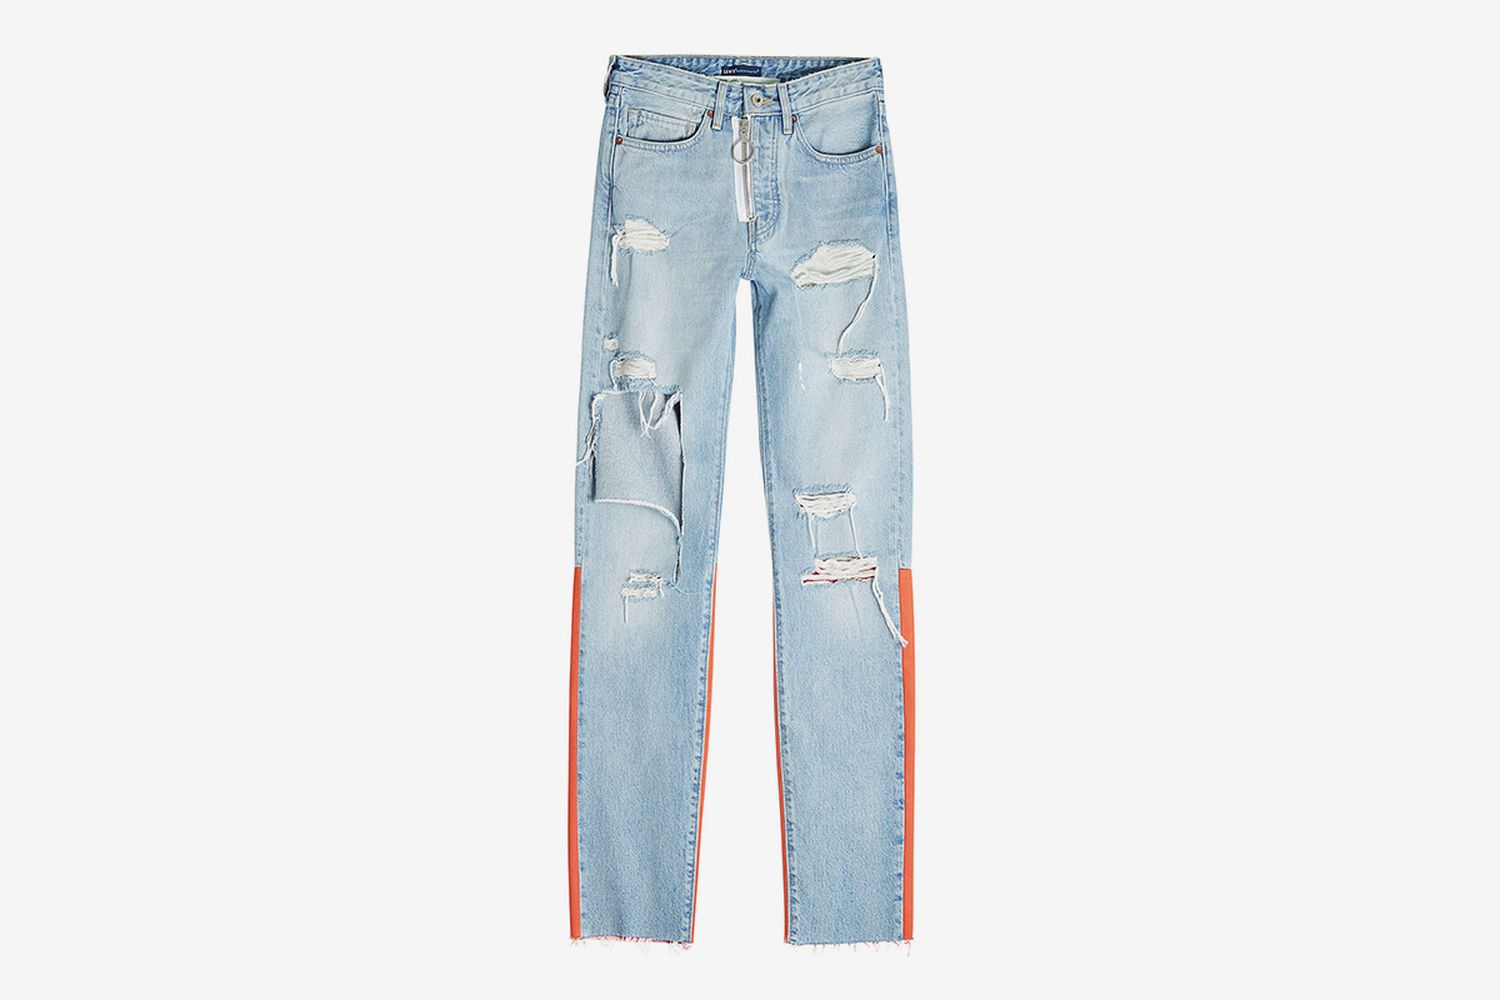 Shop the Off-WHITE x Levi's Made & Crafted Collab Right Now